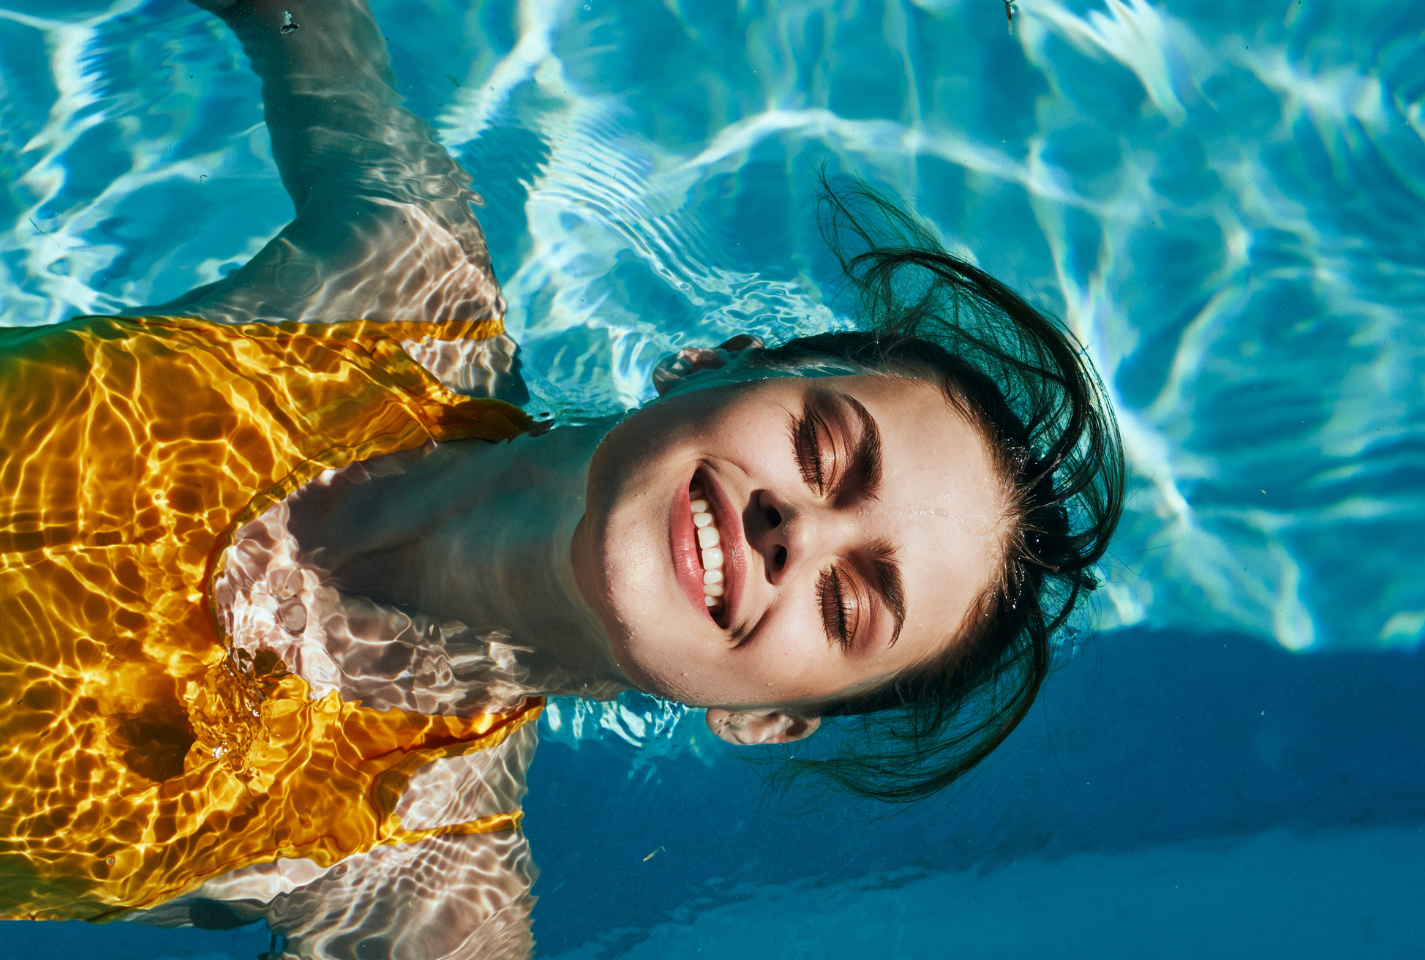 Women smiling and floating in a swimming pool, immersed in the blissful aftermath of a rejuvenating Woodhouse spa experience.